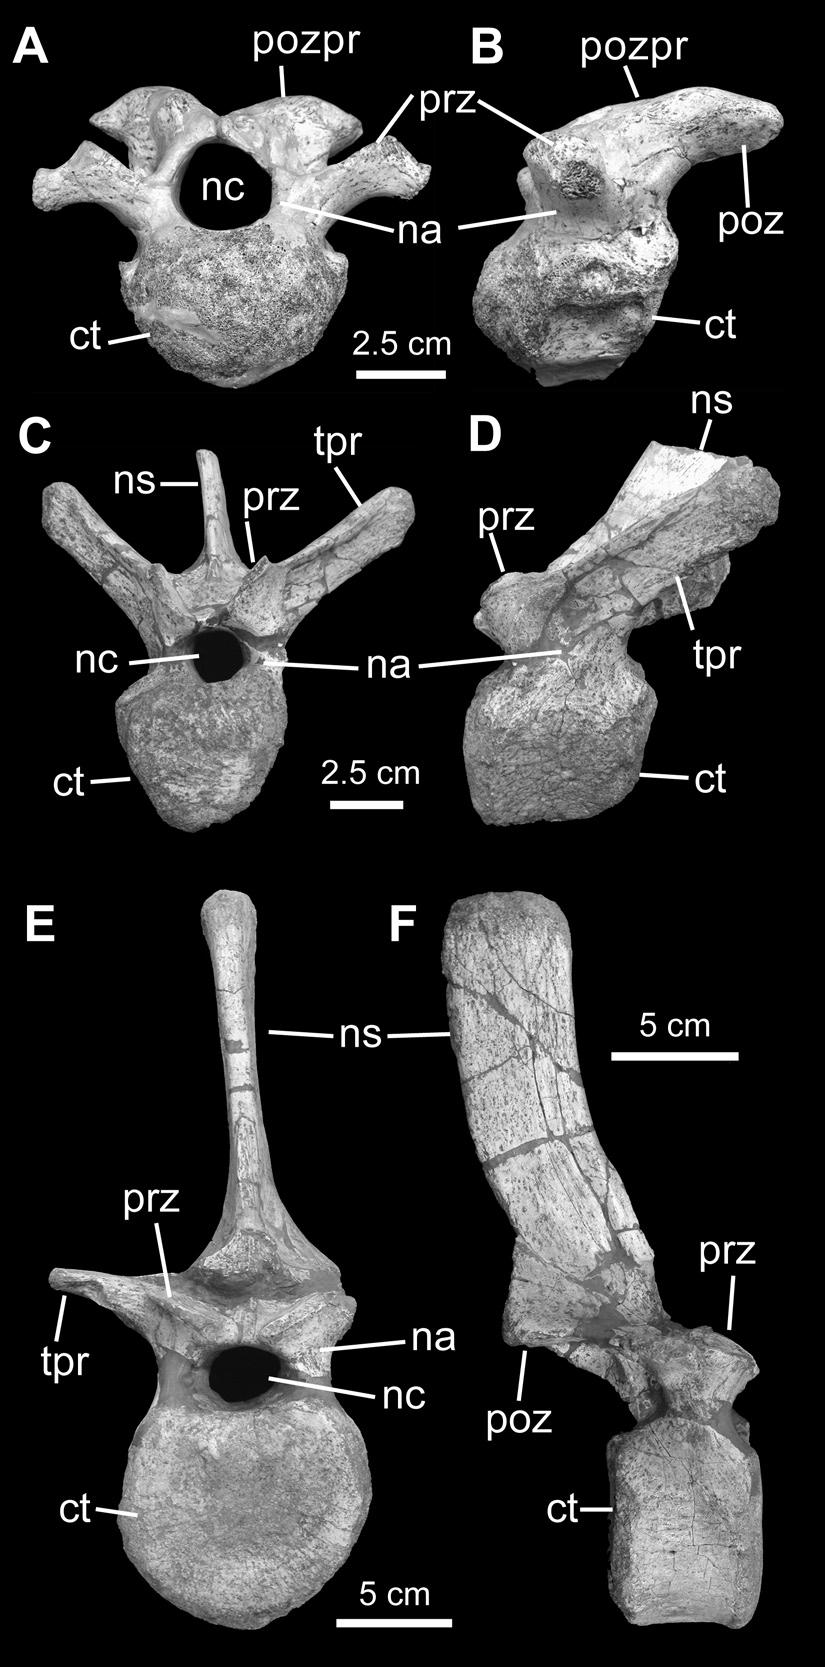 2010 PRIETO-MÁRQUEZ AND NORELL: GILMOREOSAURUS MONGOLIENSIS 19 Figure 9. Selected axial elements of Gilmoreosaurus mongoliensis.